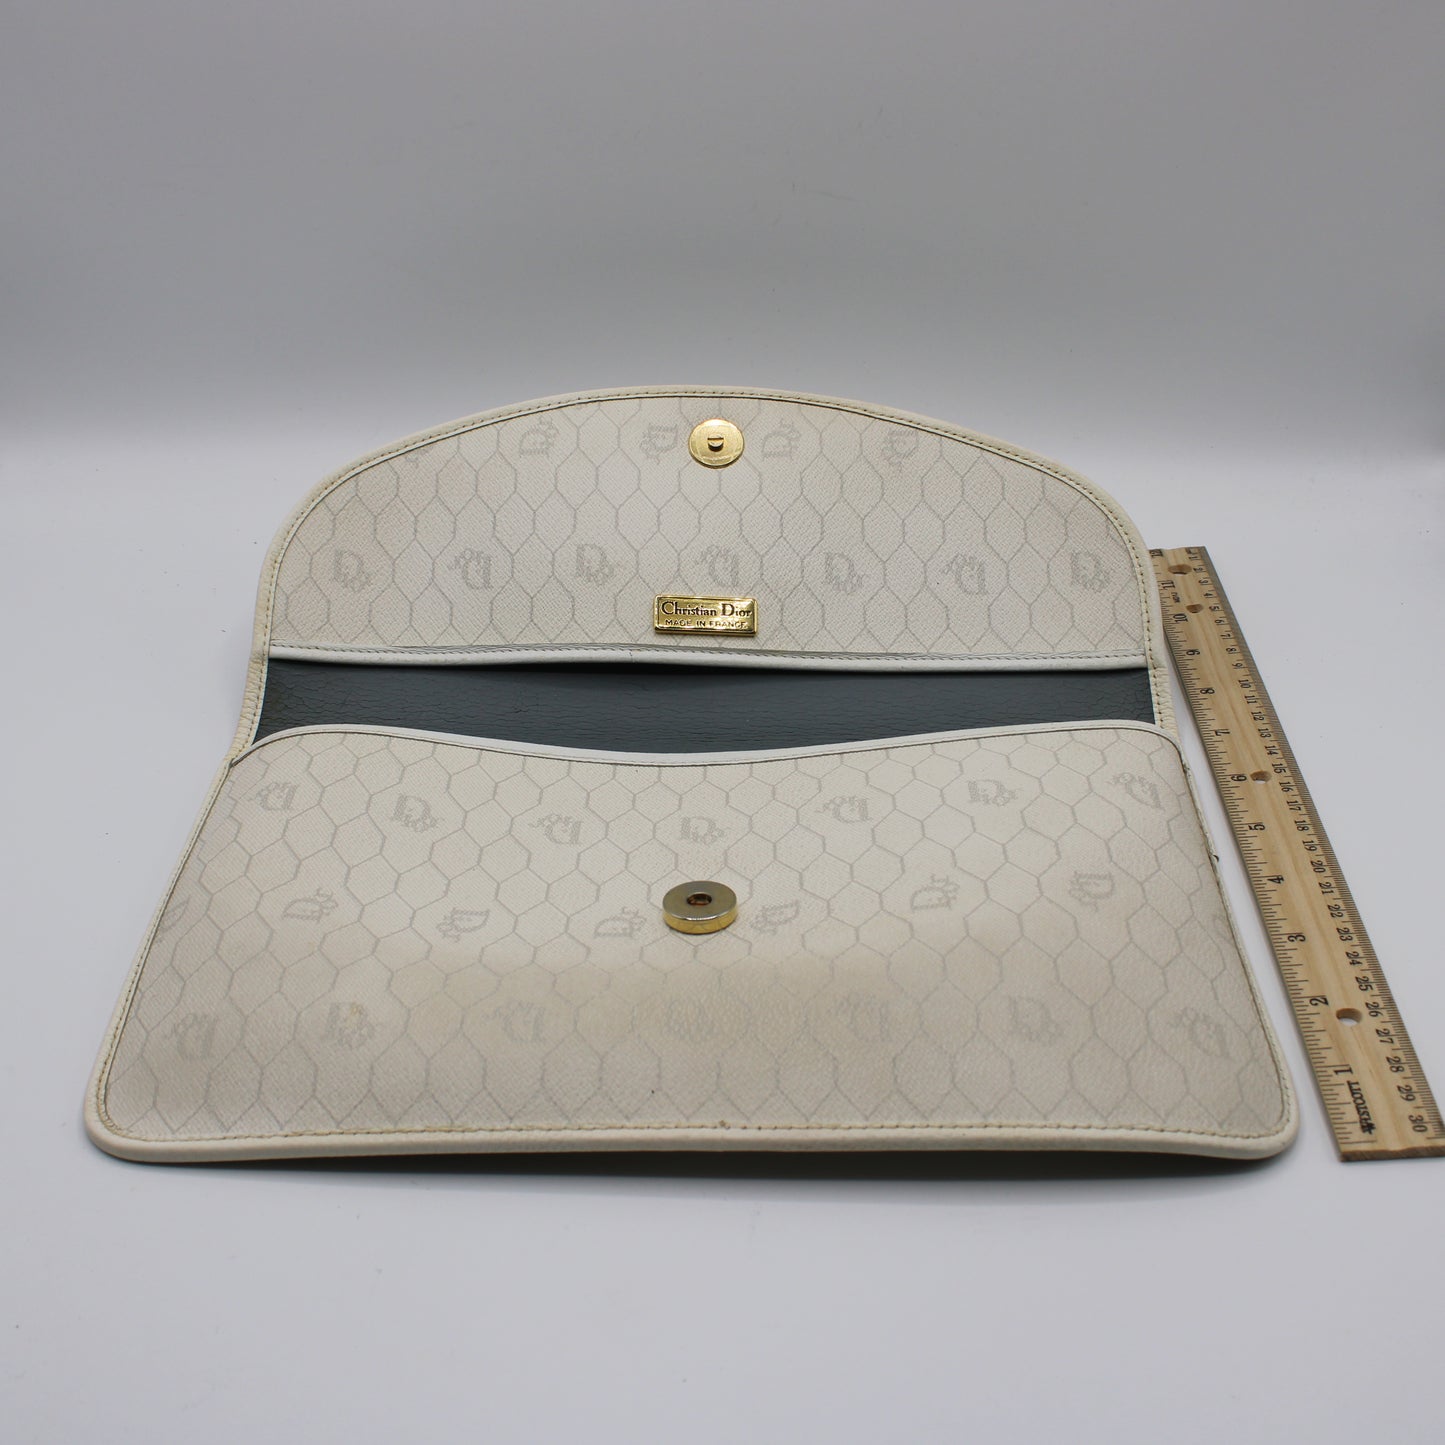 Christian Dior Off-White Honeycomb Pattern Fold-over Clutch Bag